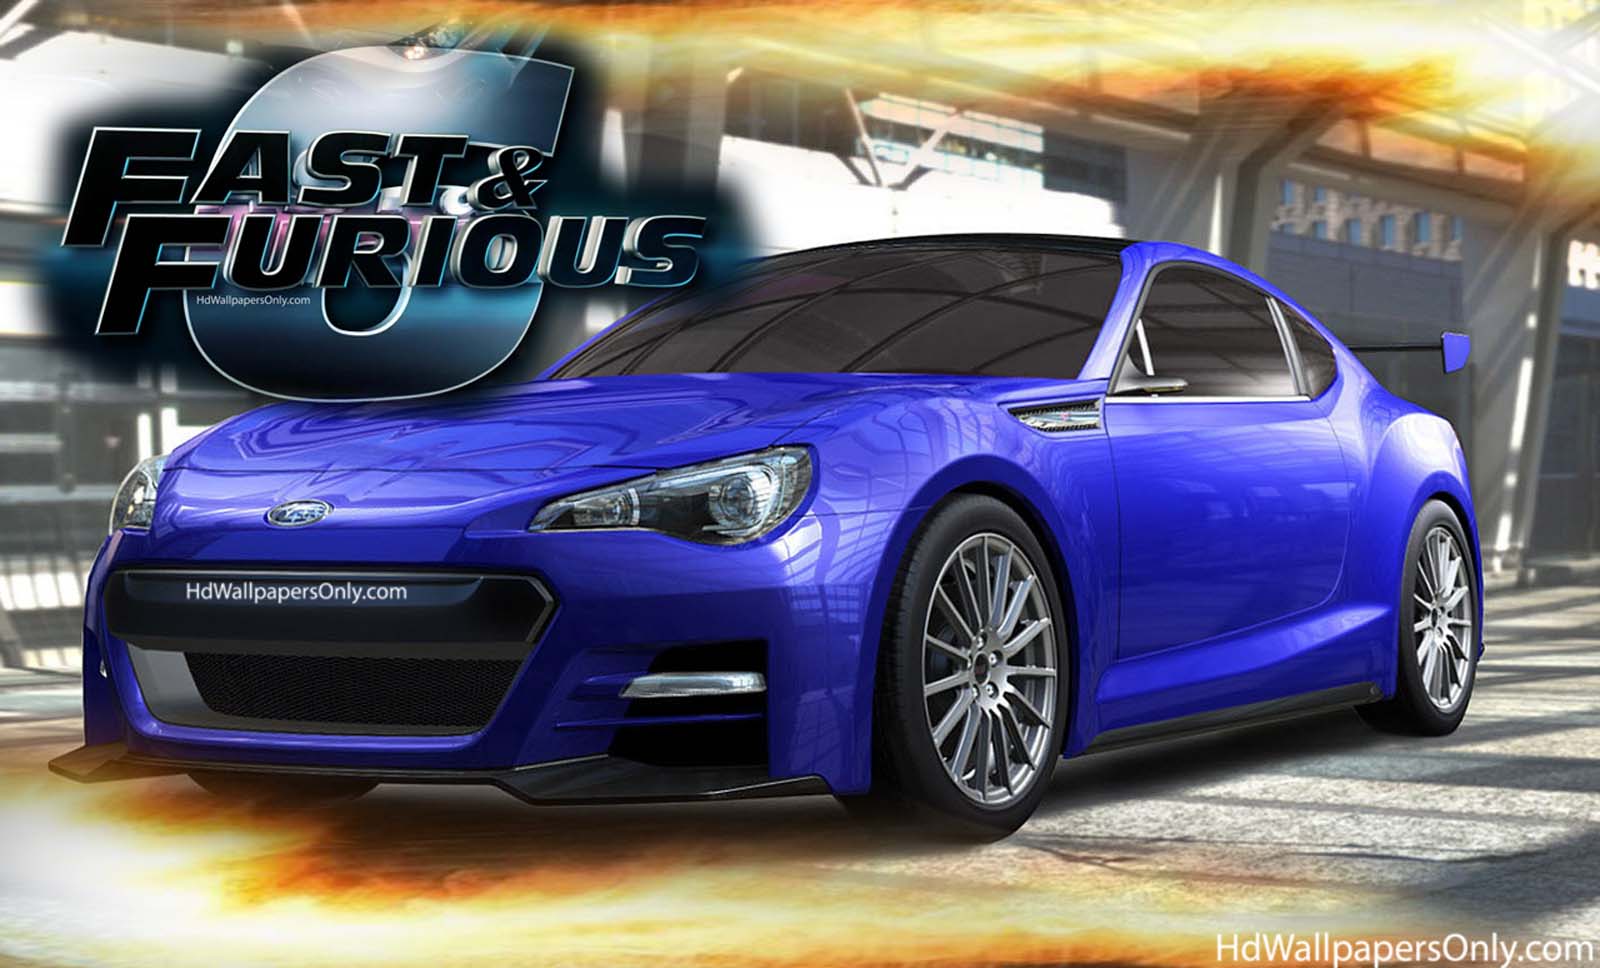 Wallpaper For > Fast And Furious Cars Wallpaper